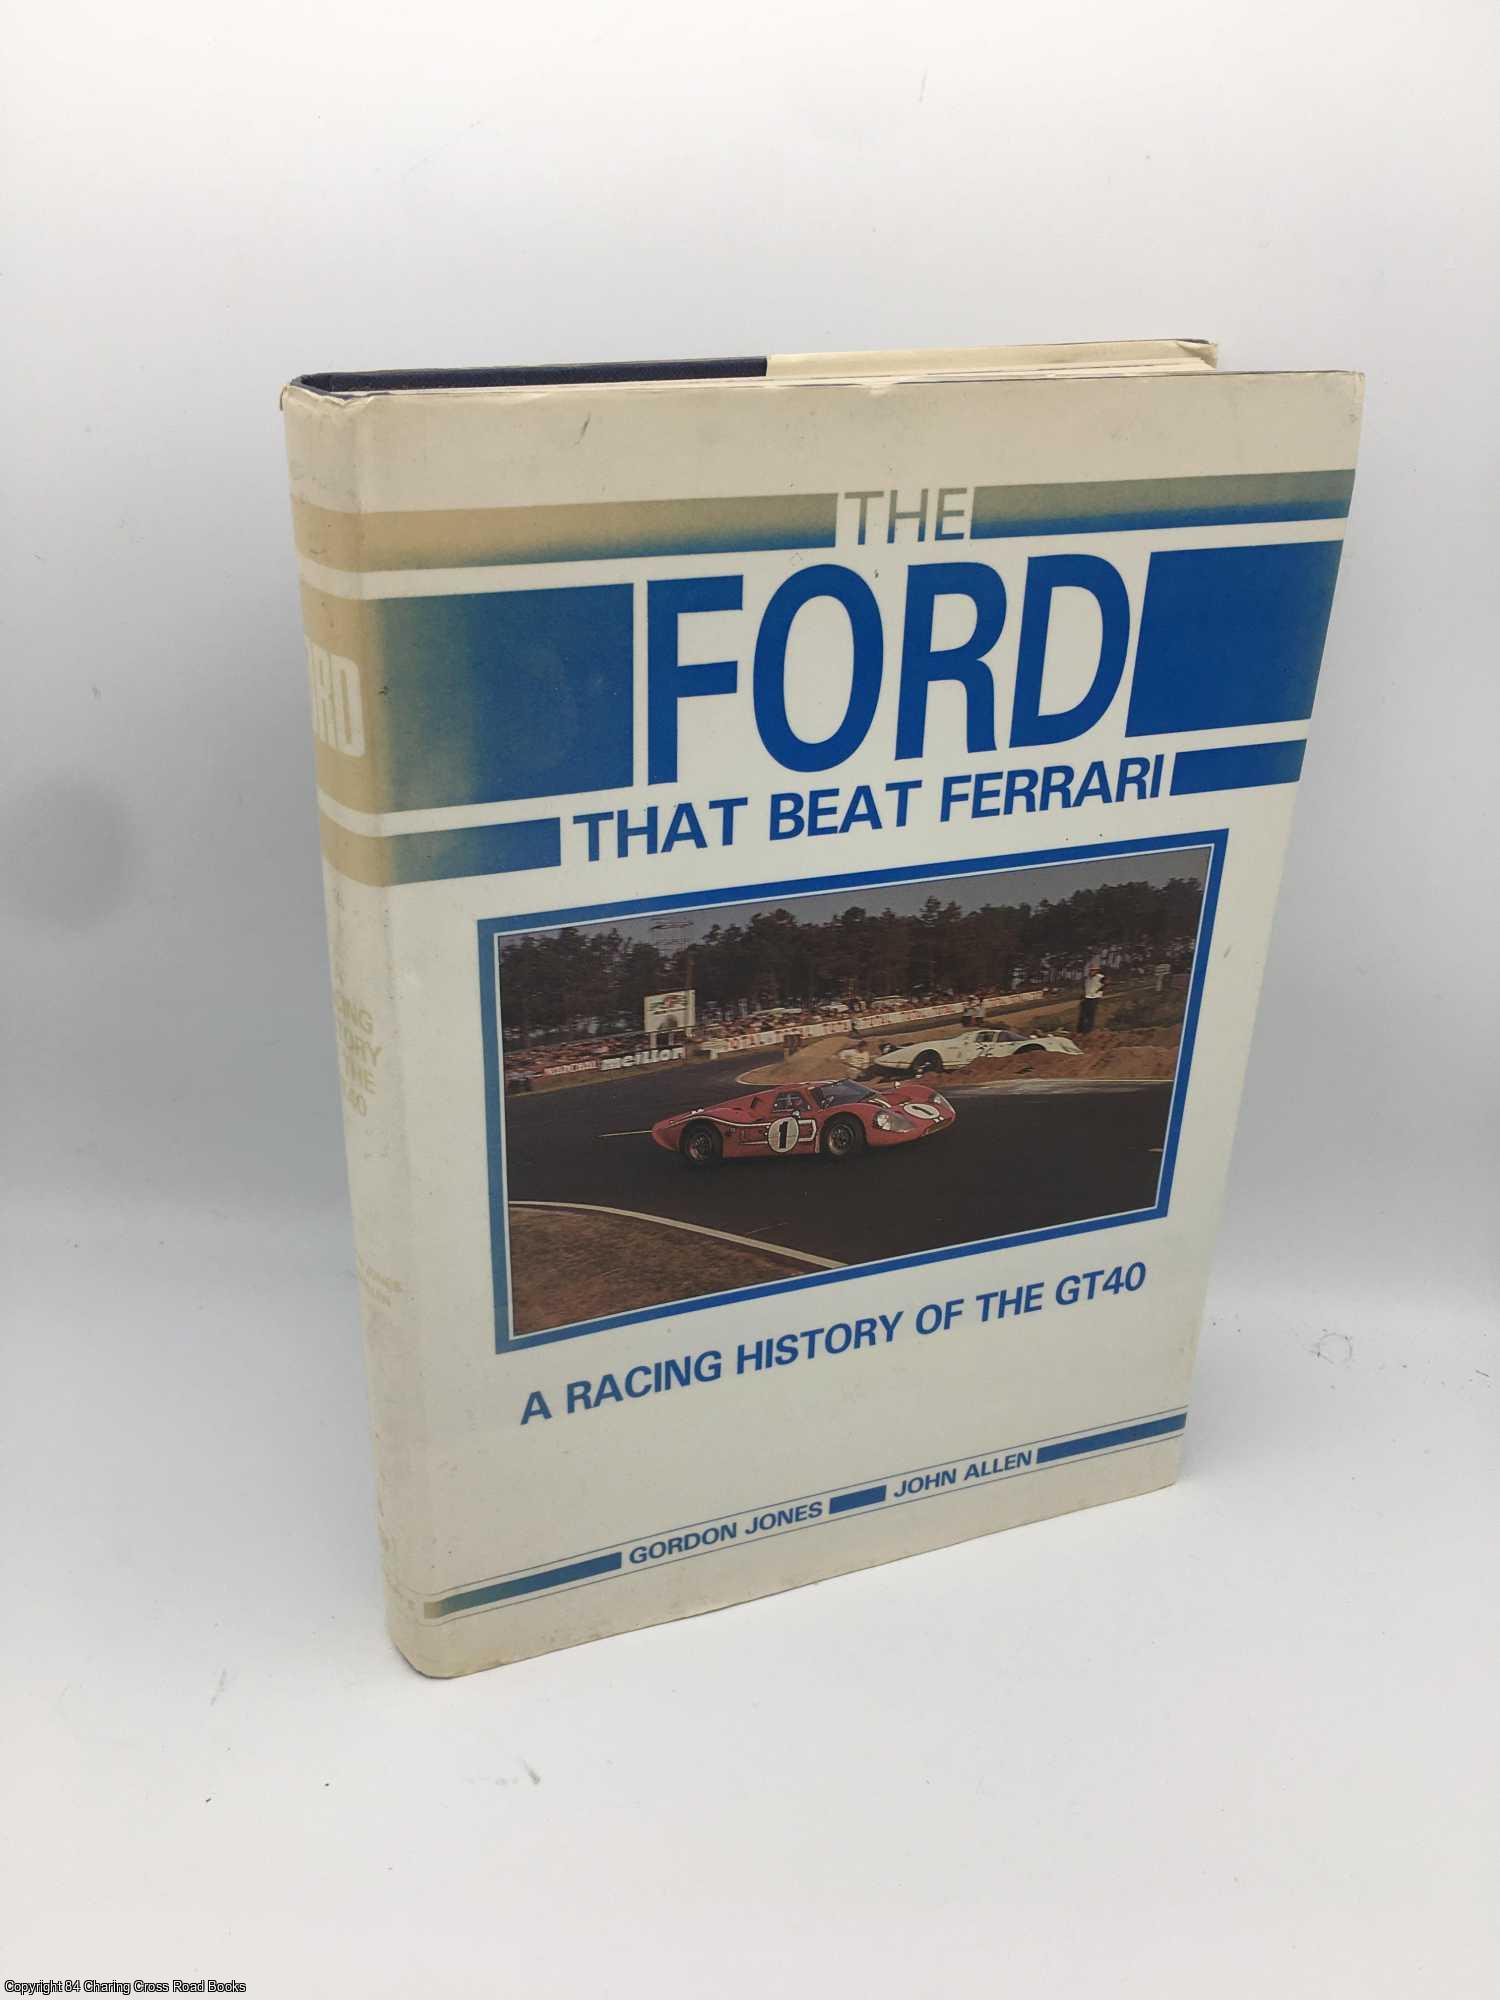 Allen, John S. - Ford That Beat Ferrari: A Racing History of the Ford GT40